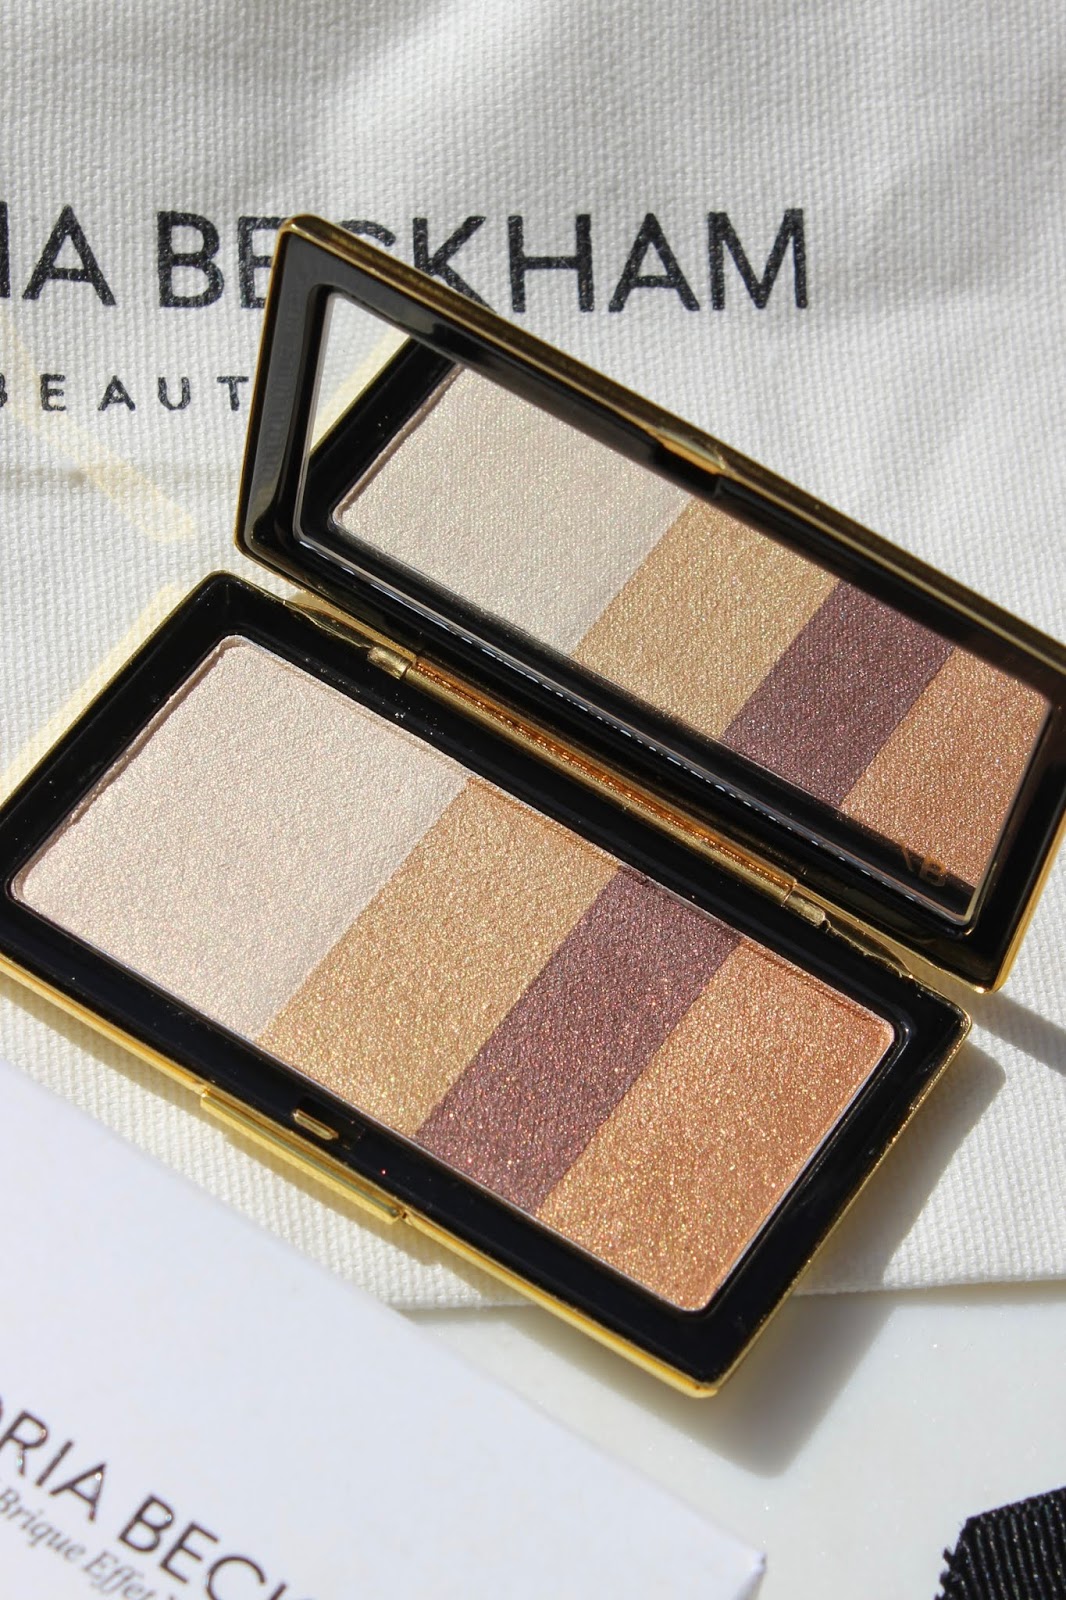 Victoria Beckham Beauty Smoky Eye Brick in Silk | Review & Swatches